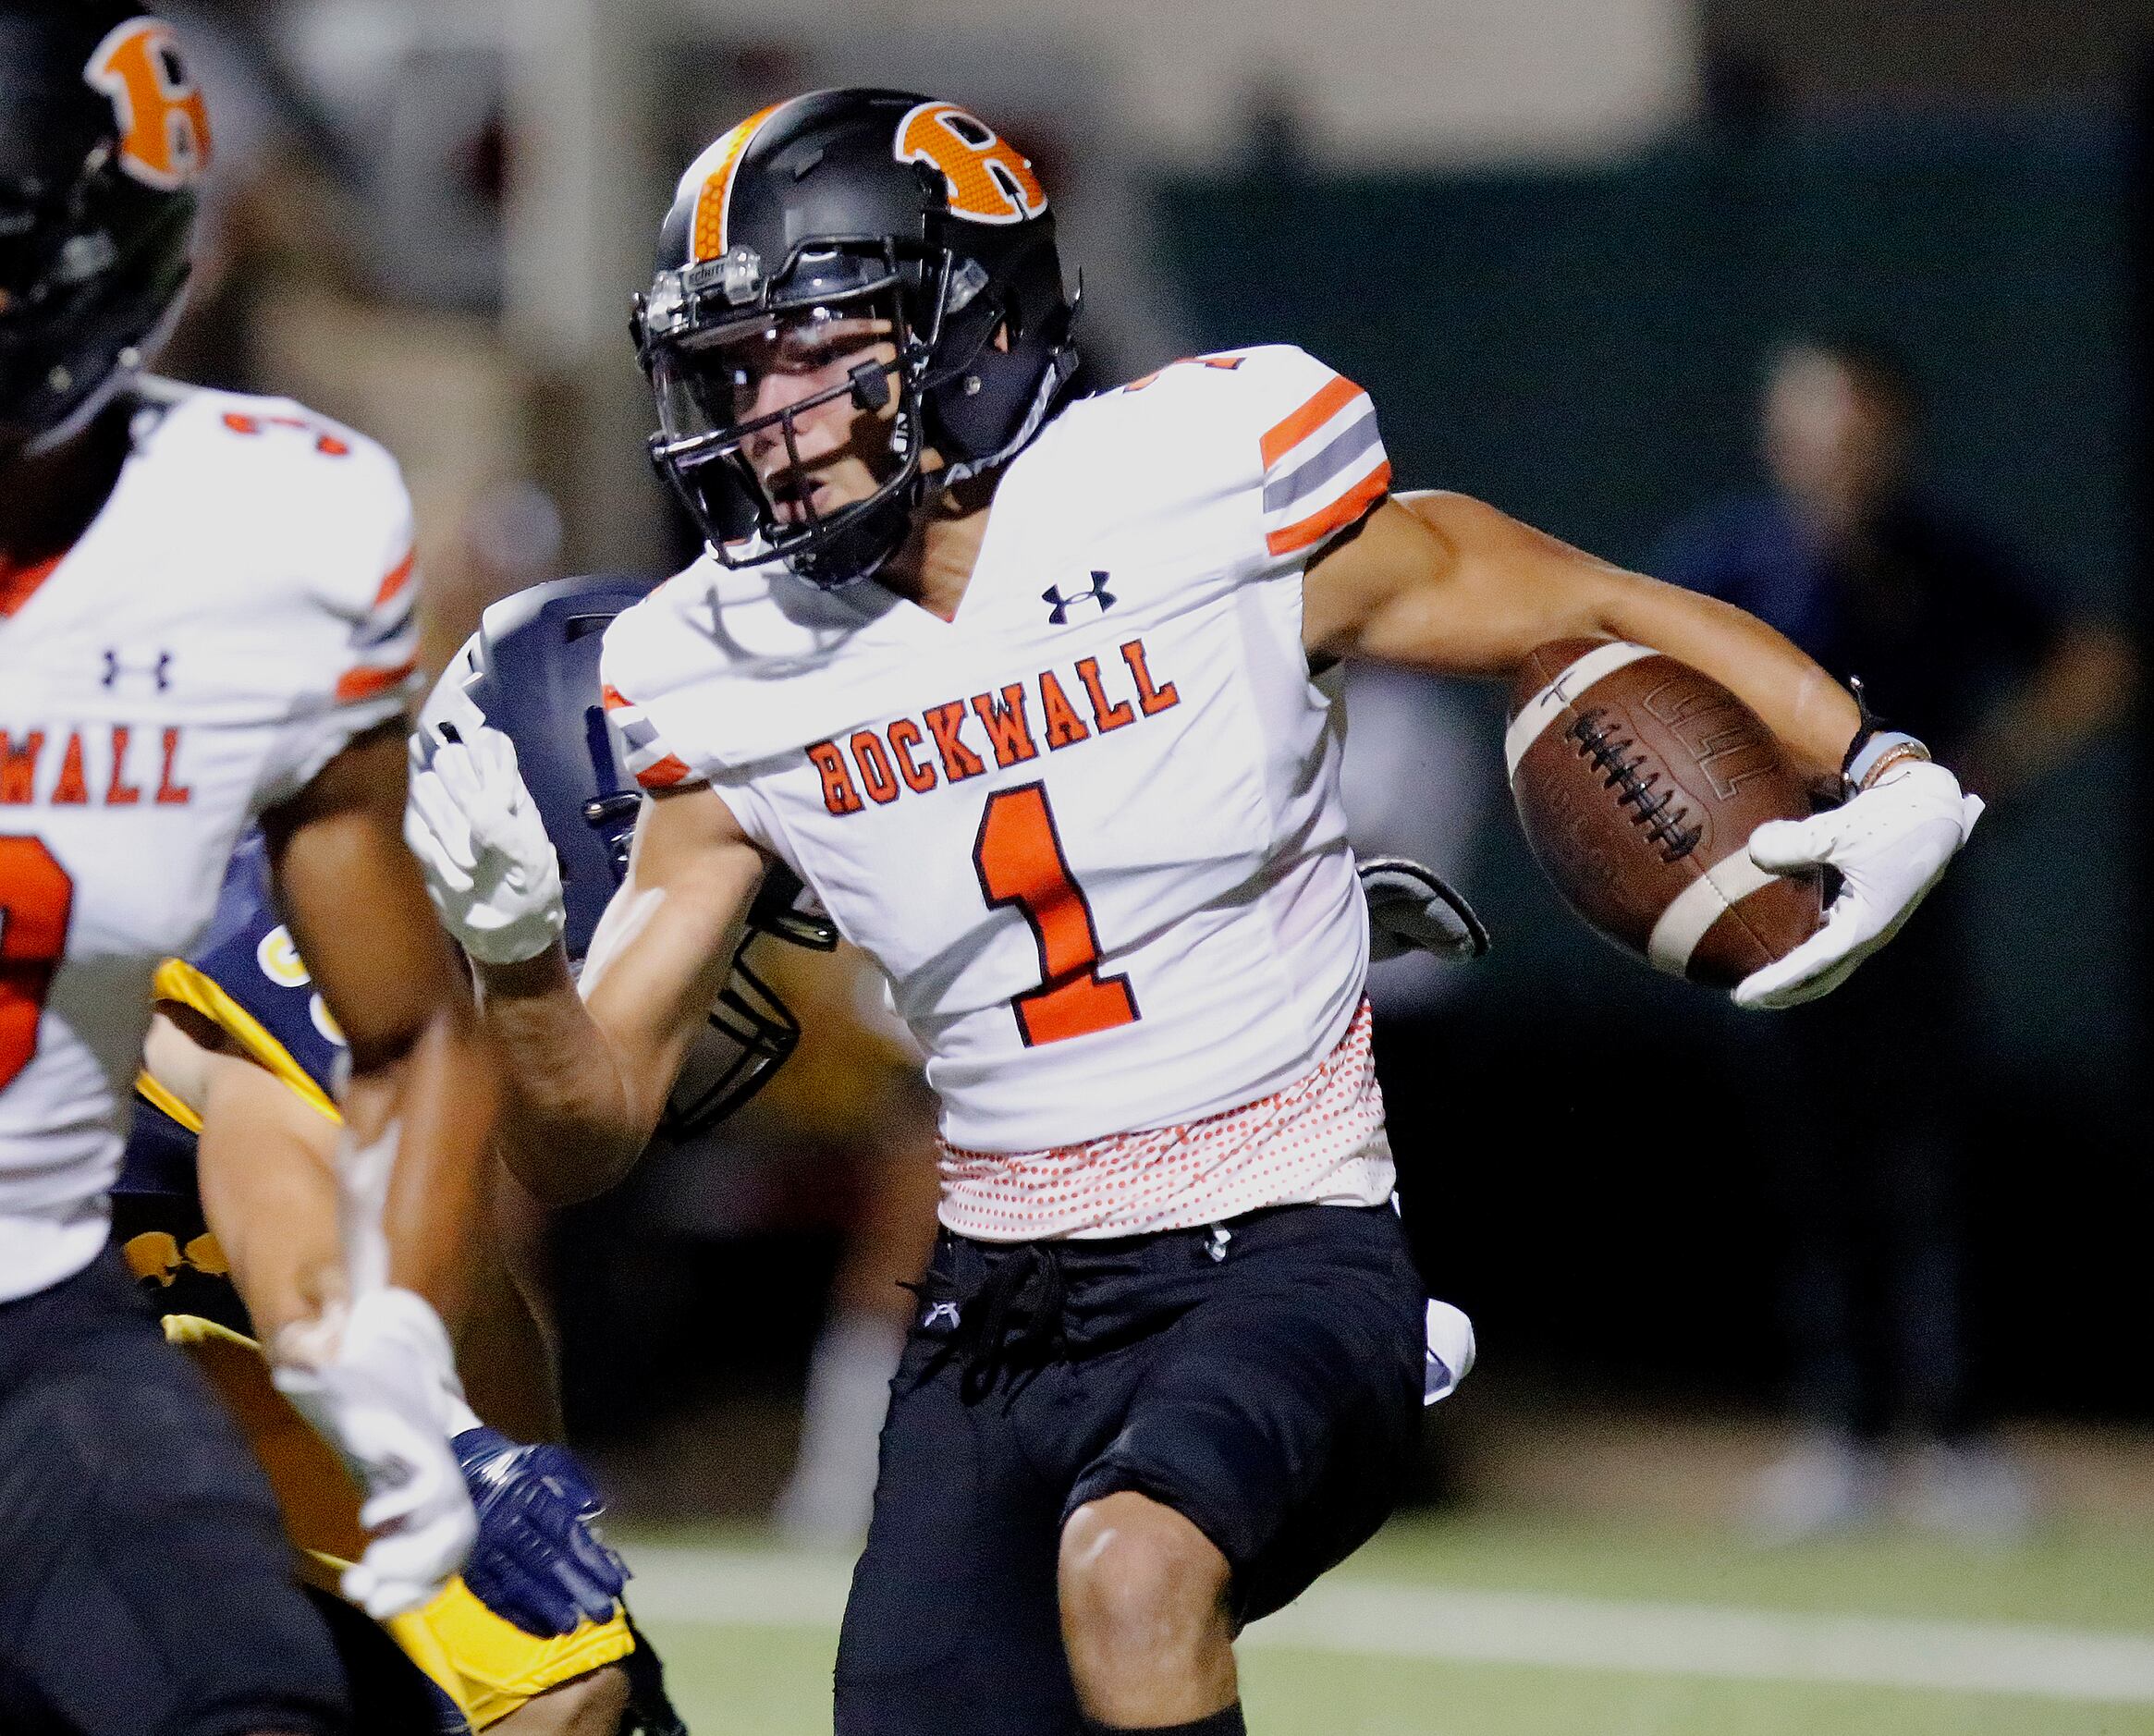 Rockwall High School wide receiver Aiden Meeks (1) returns a kickoff during the first half...